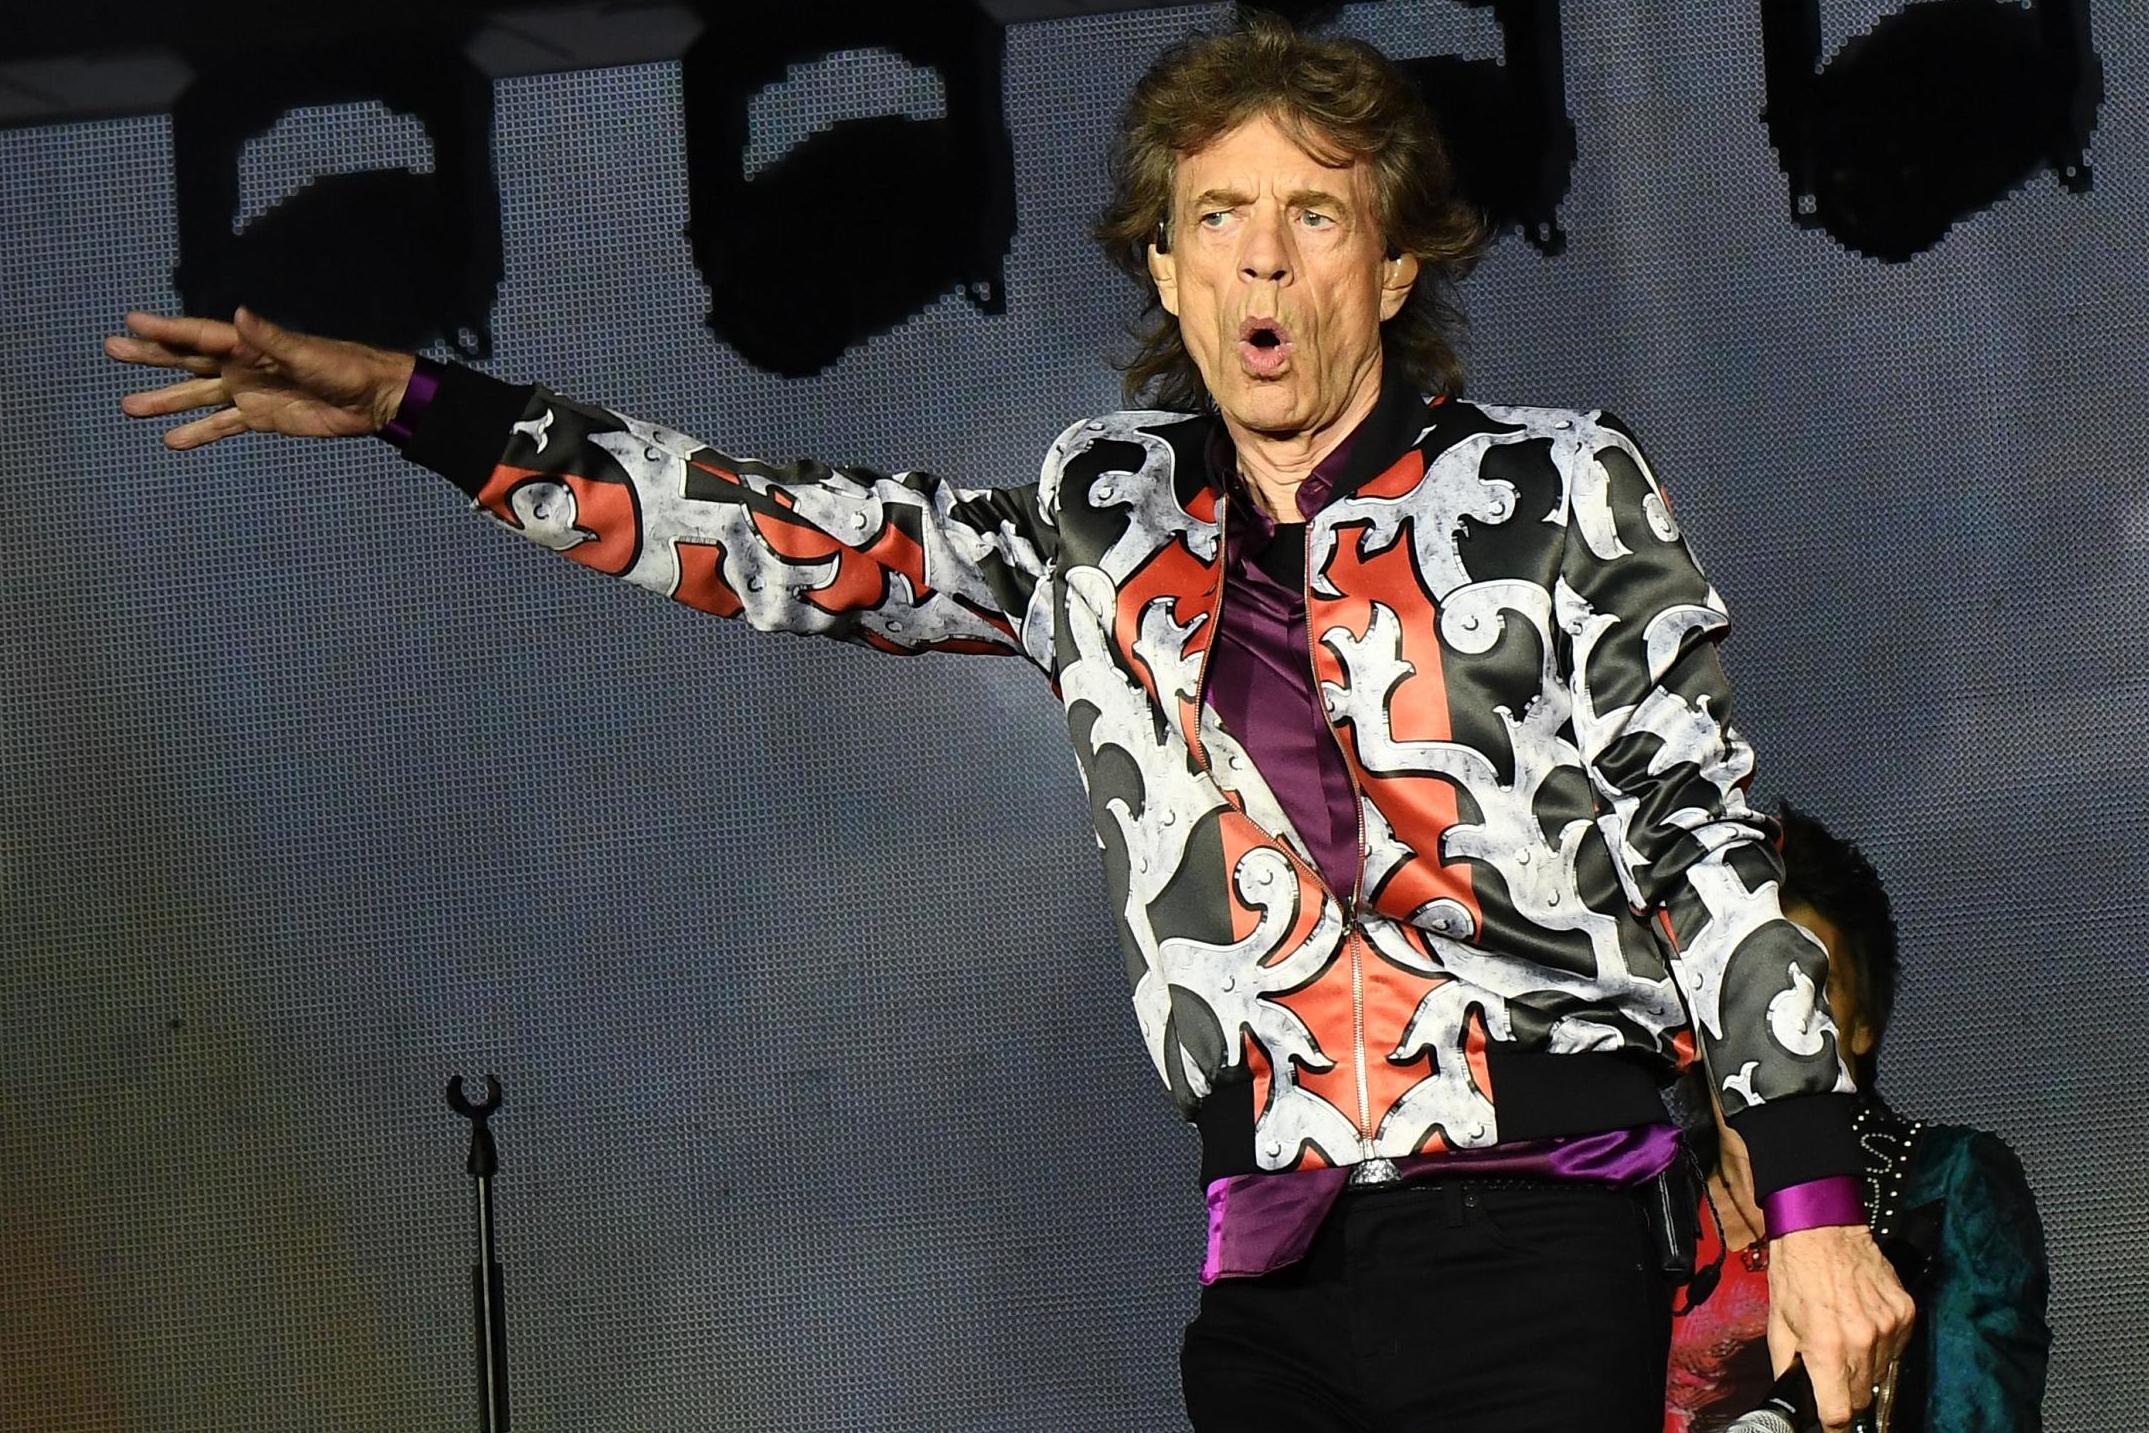 Mick Jagger shares video of himself dancing after recovering from 'heart surgery'